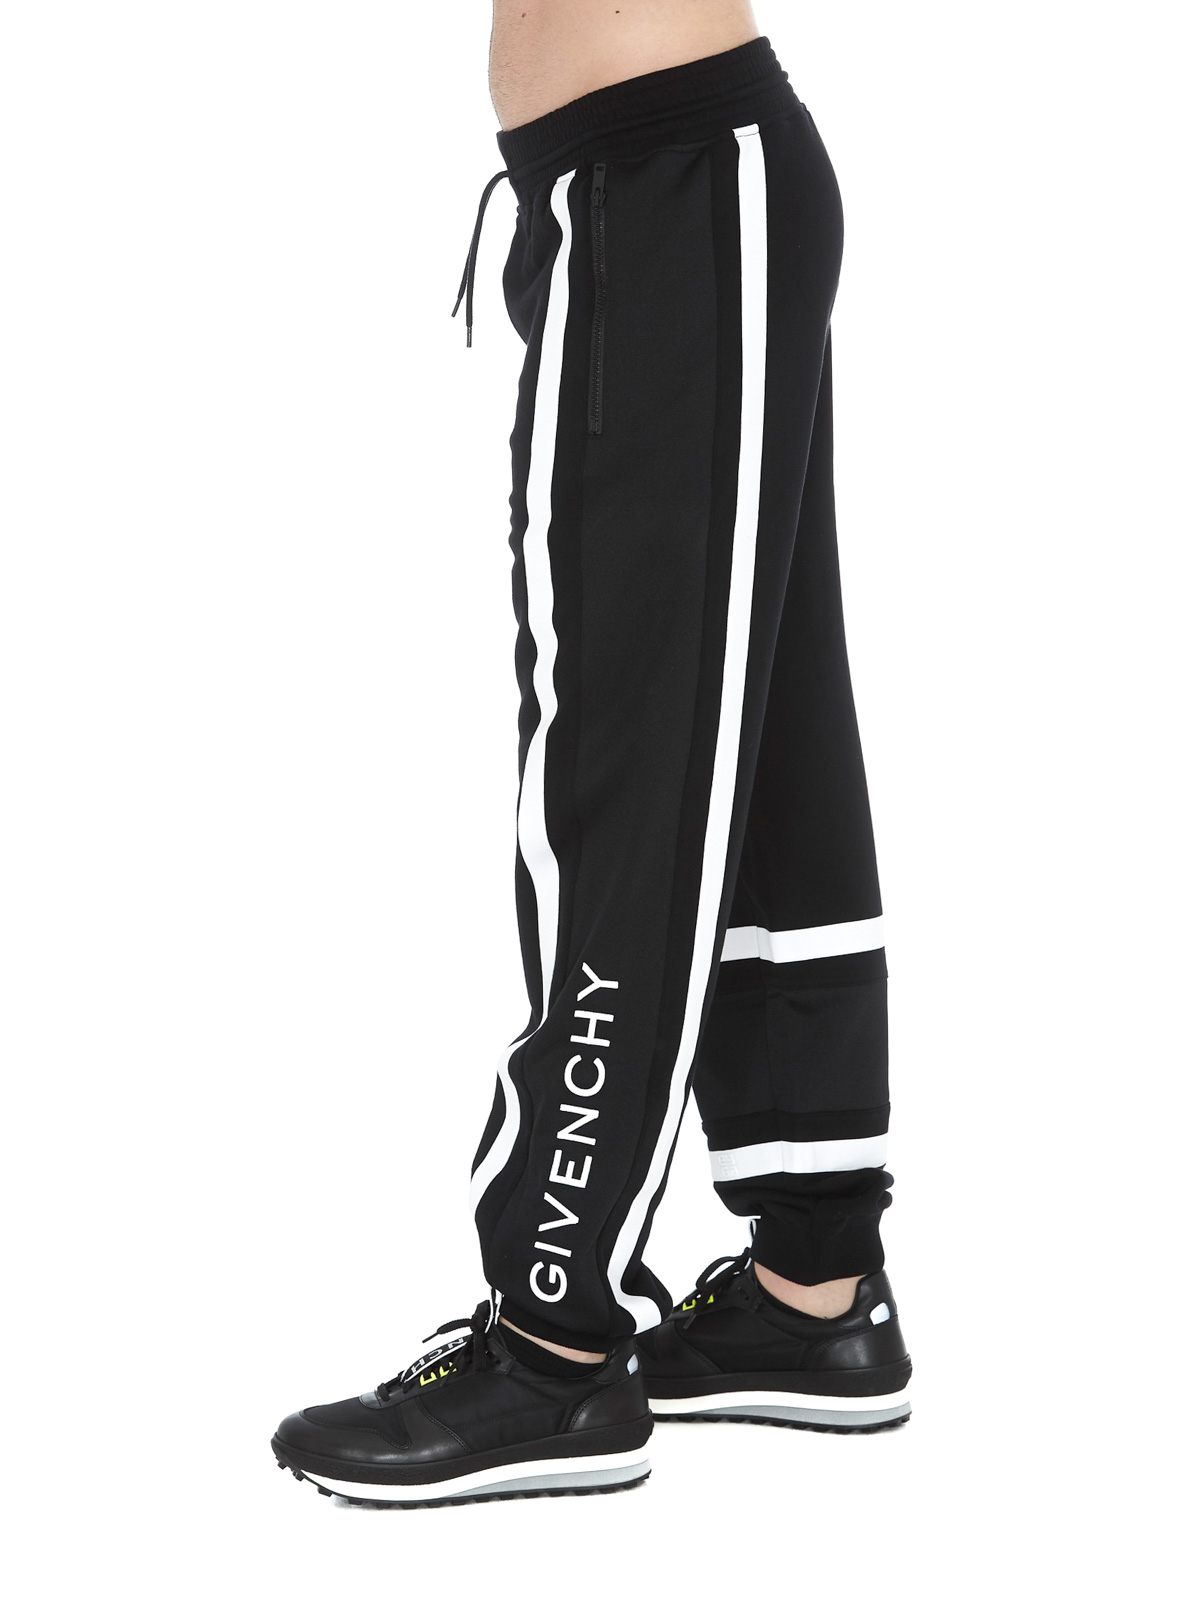 GIVENCHY Track Pants for Men | ModeSens